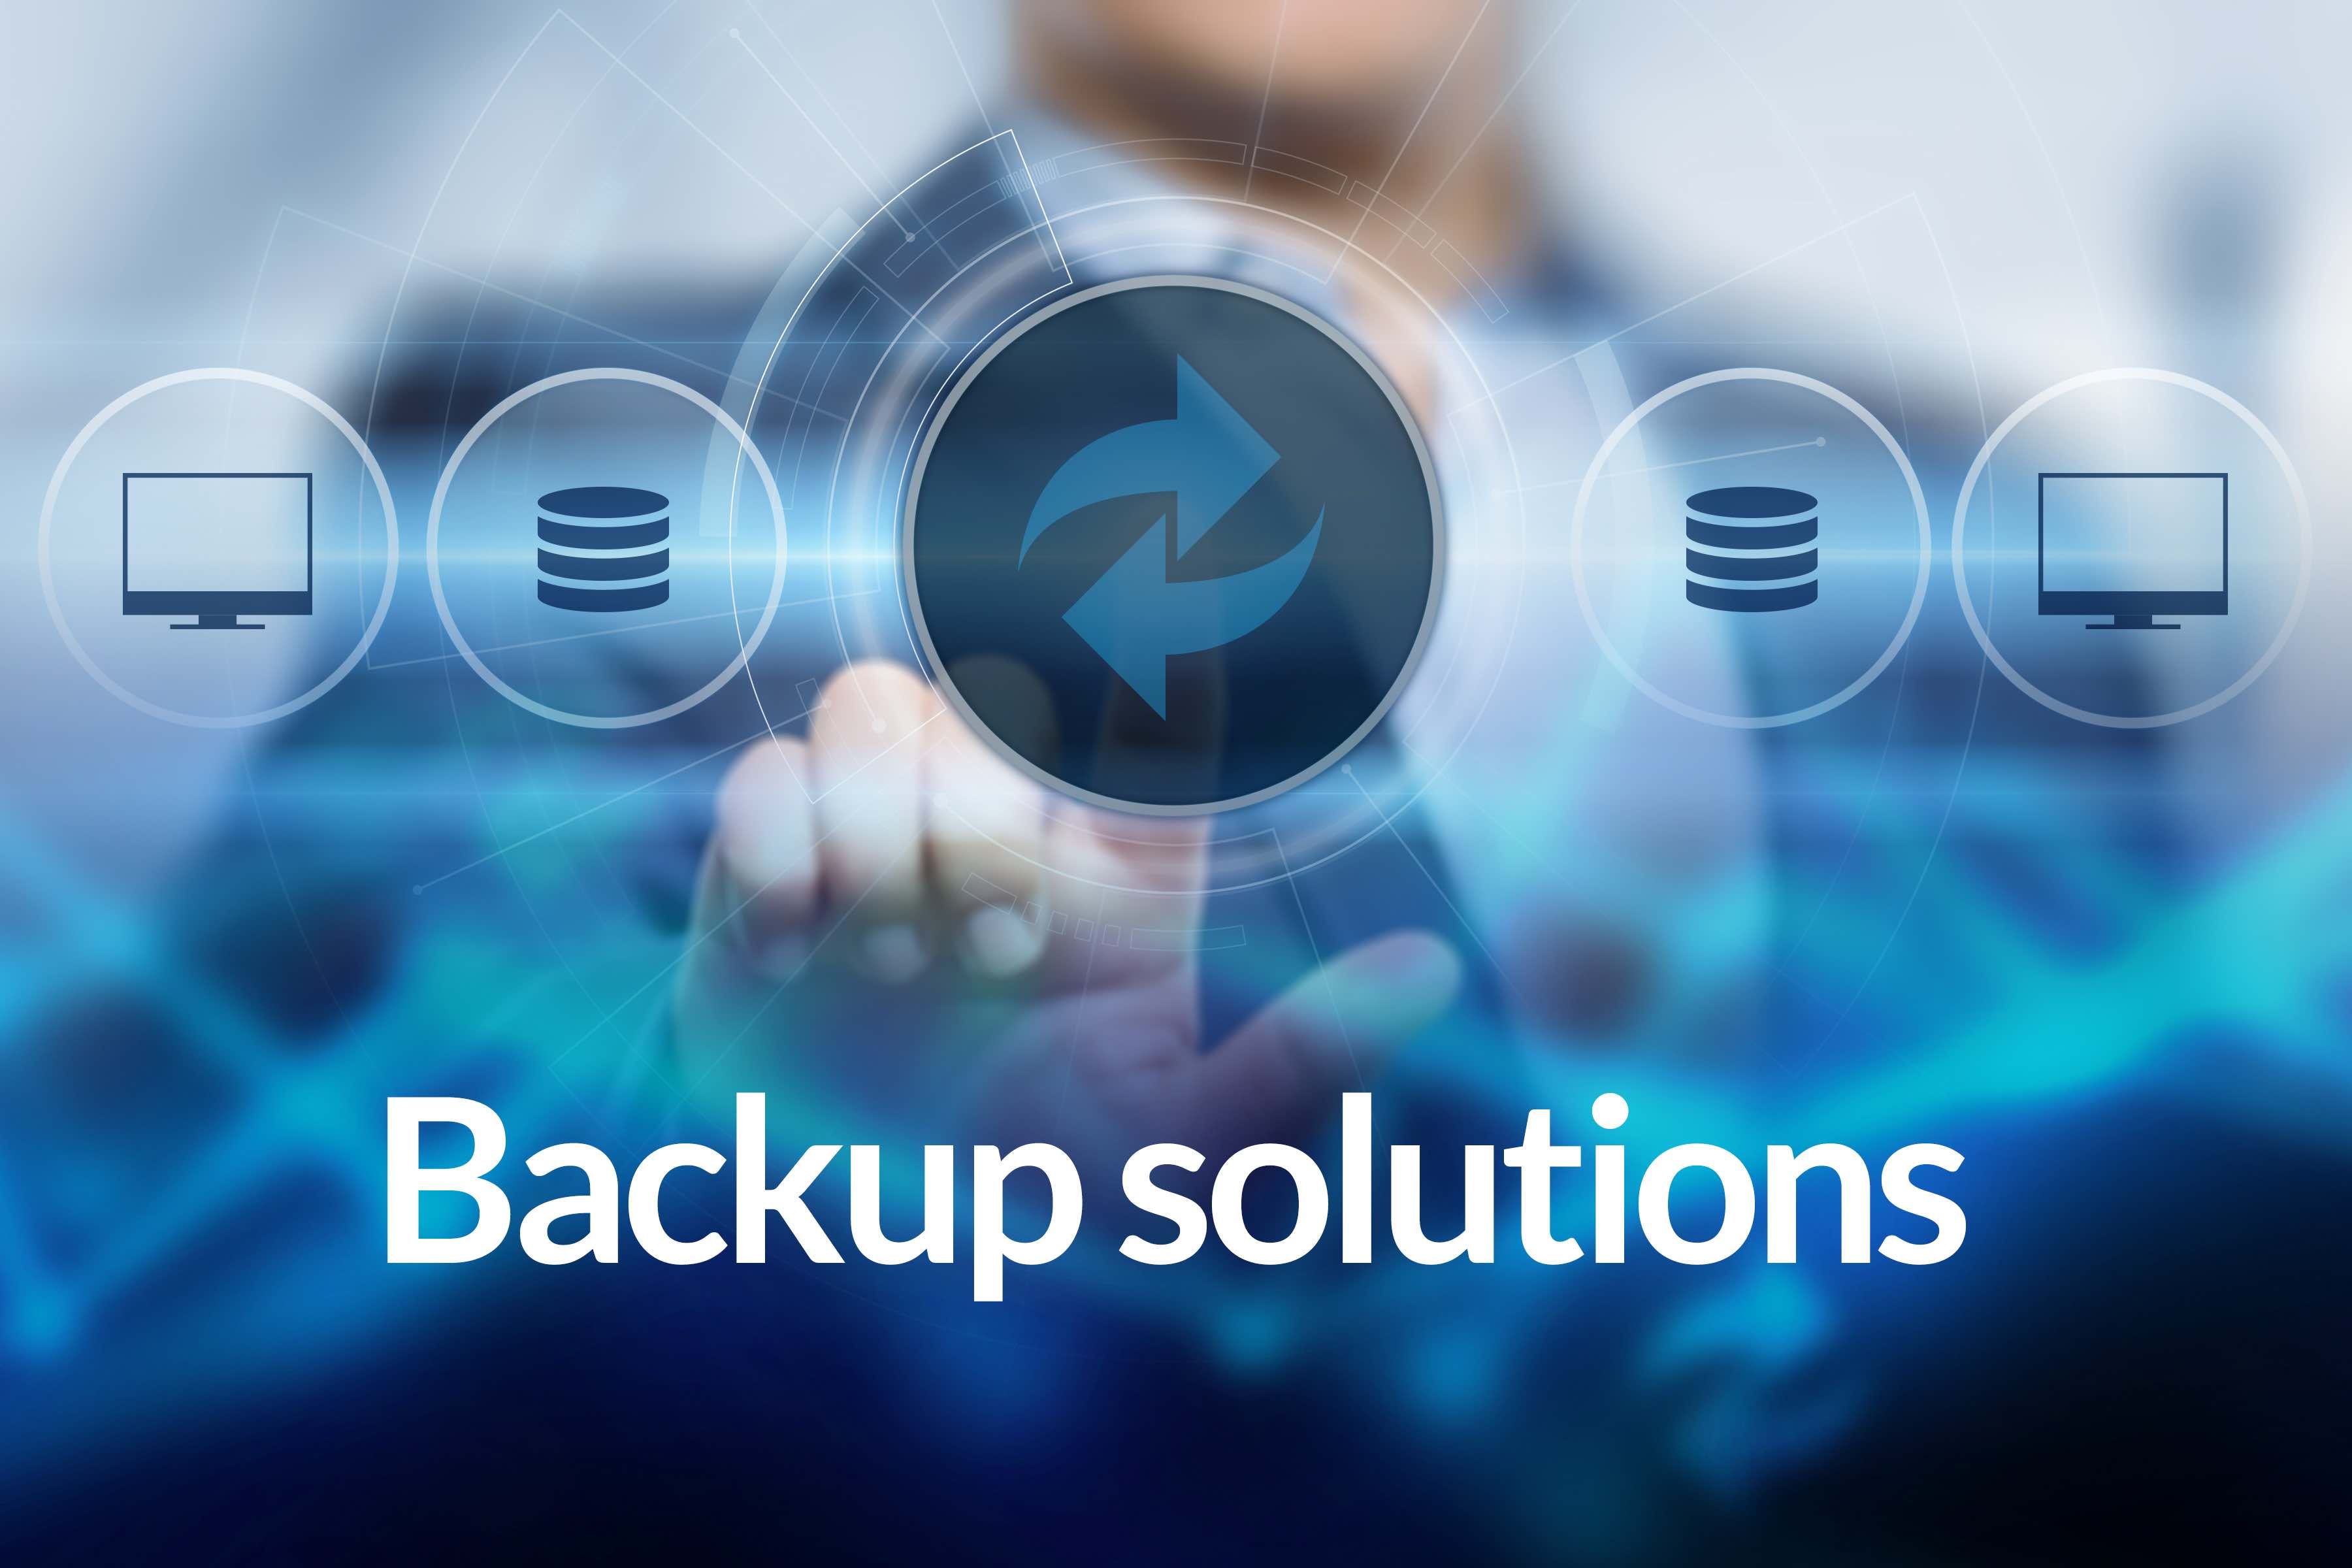 personal computer backup services